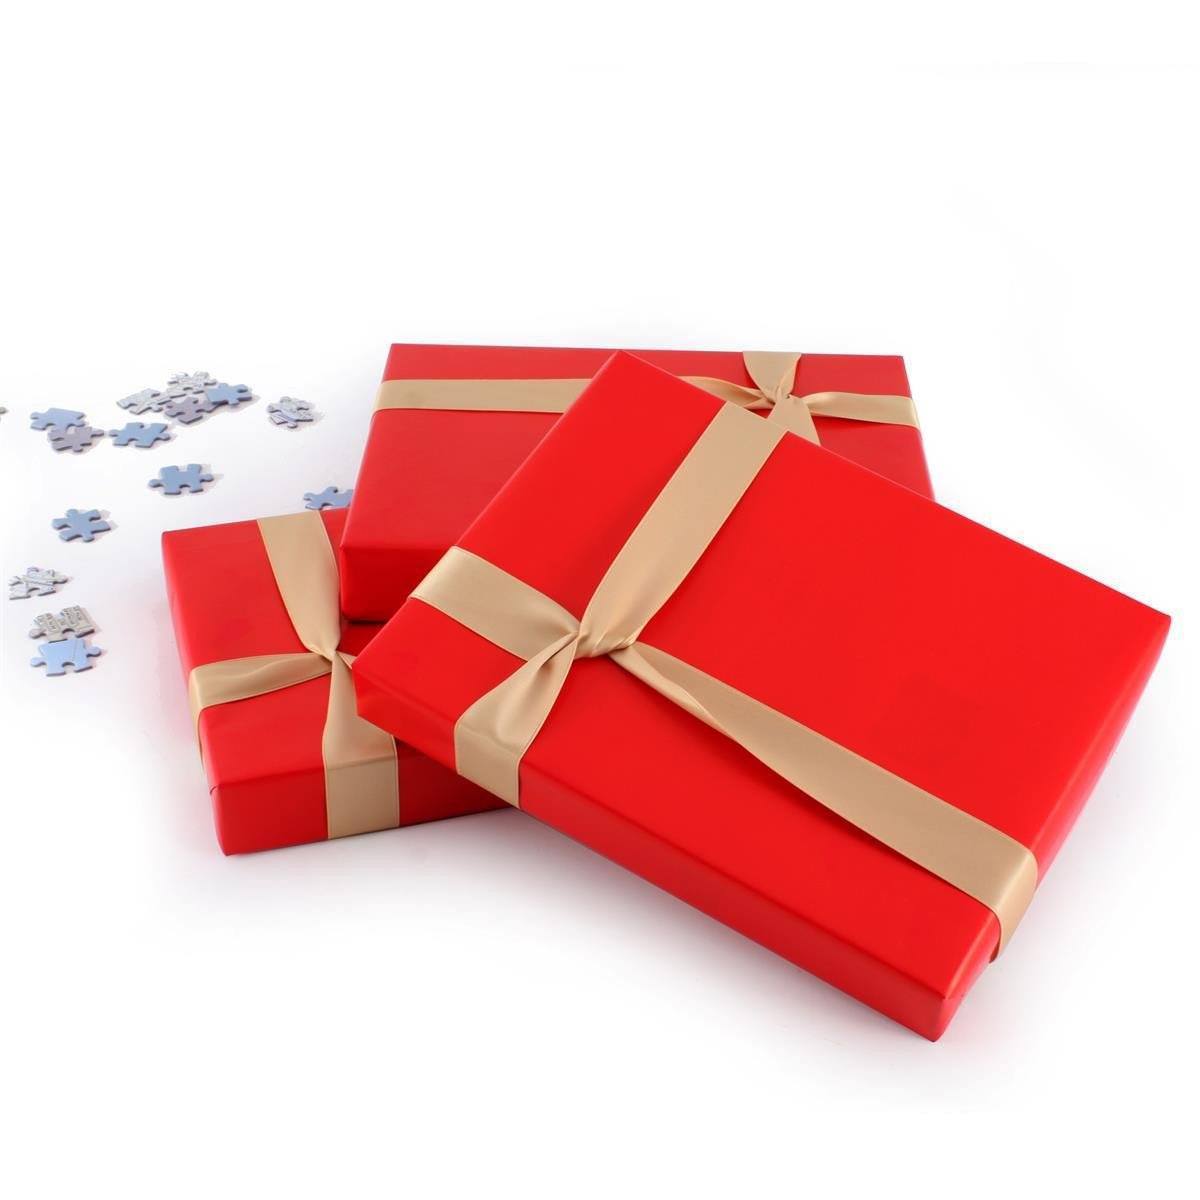 OPTIONS_HIDDEN_PRODUCT - Gift Wrapping Service